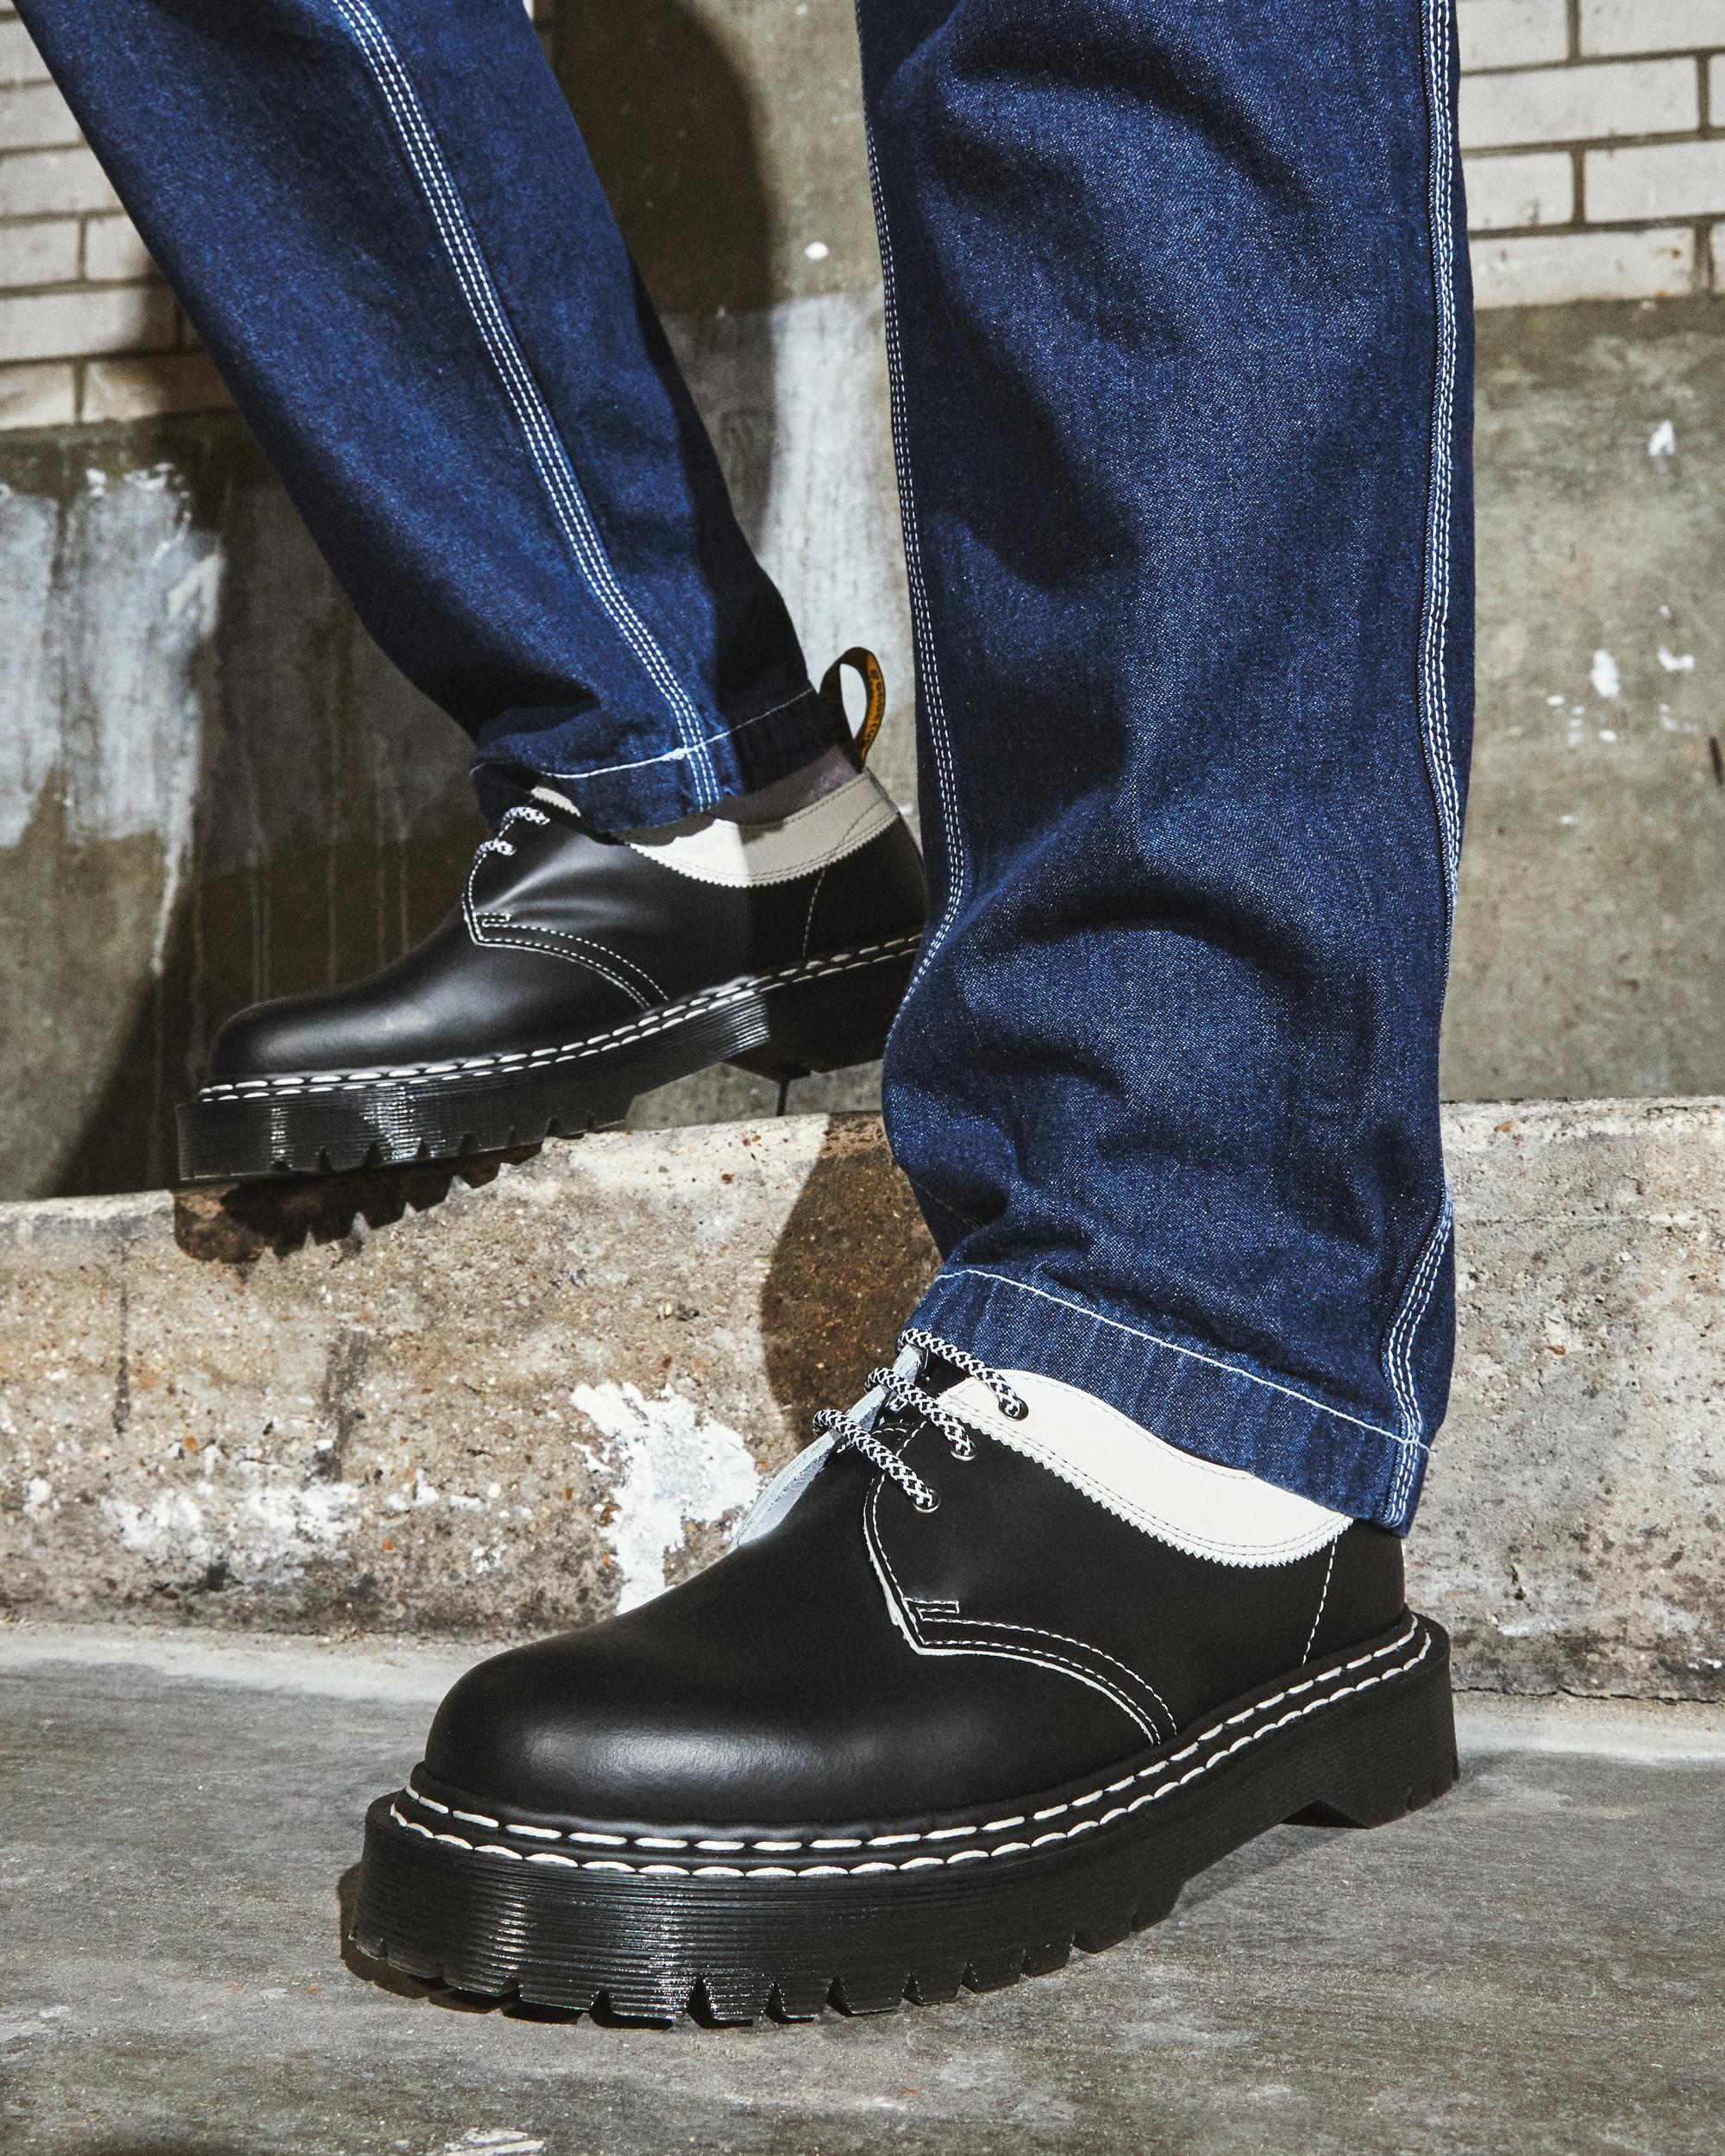 1461 Bex Smooth Contrast Leather Oxford Shoes | Dr. Martens